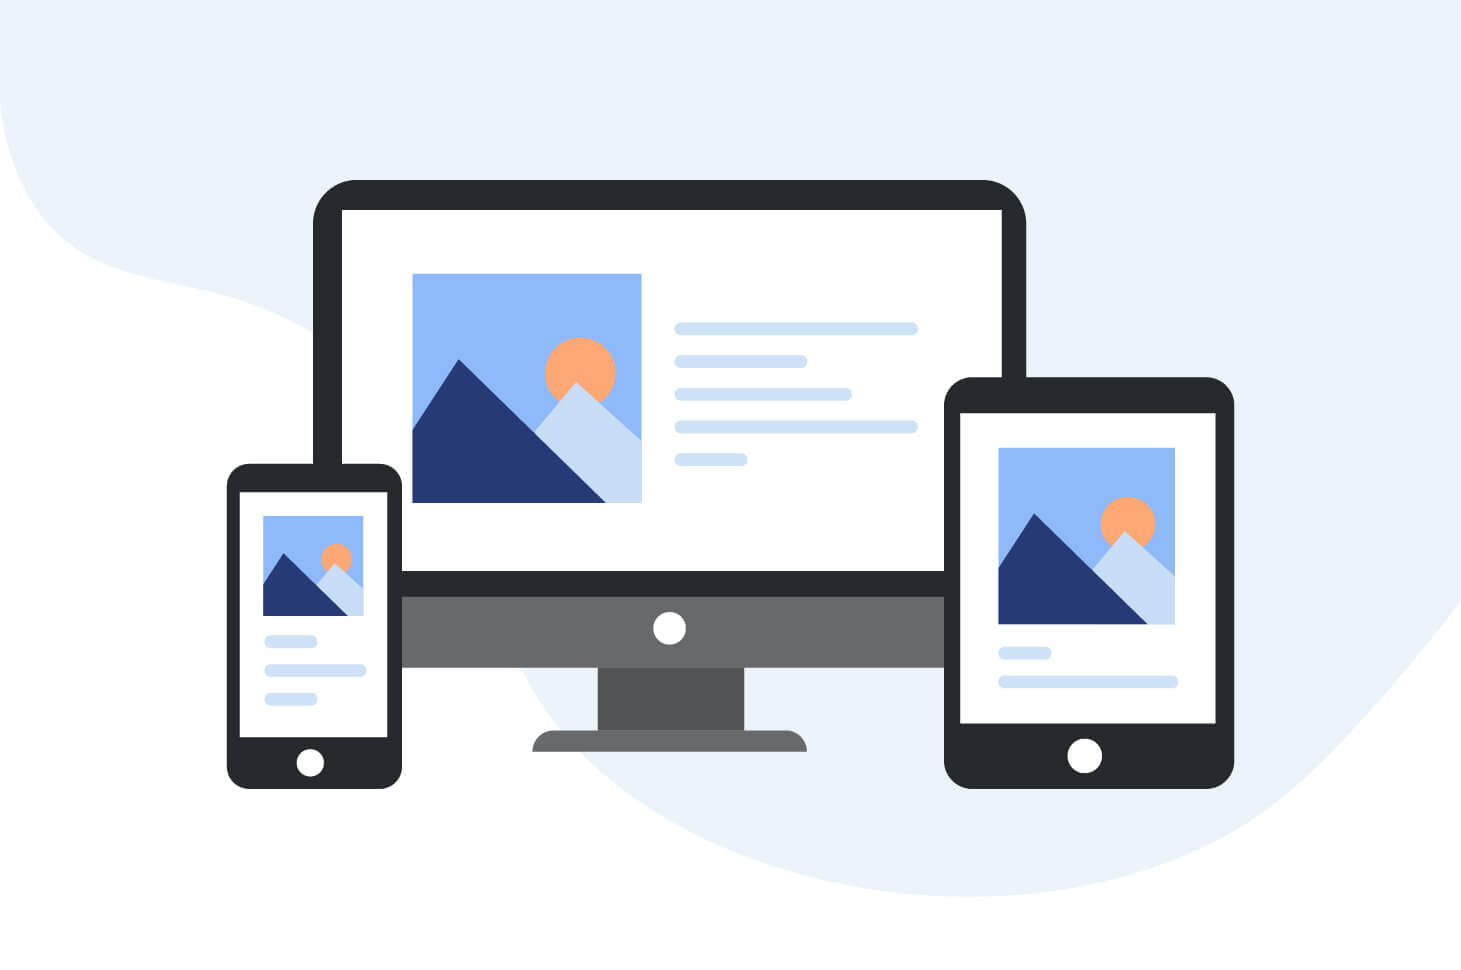 Responsive websites are the new gold standard.